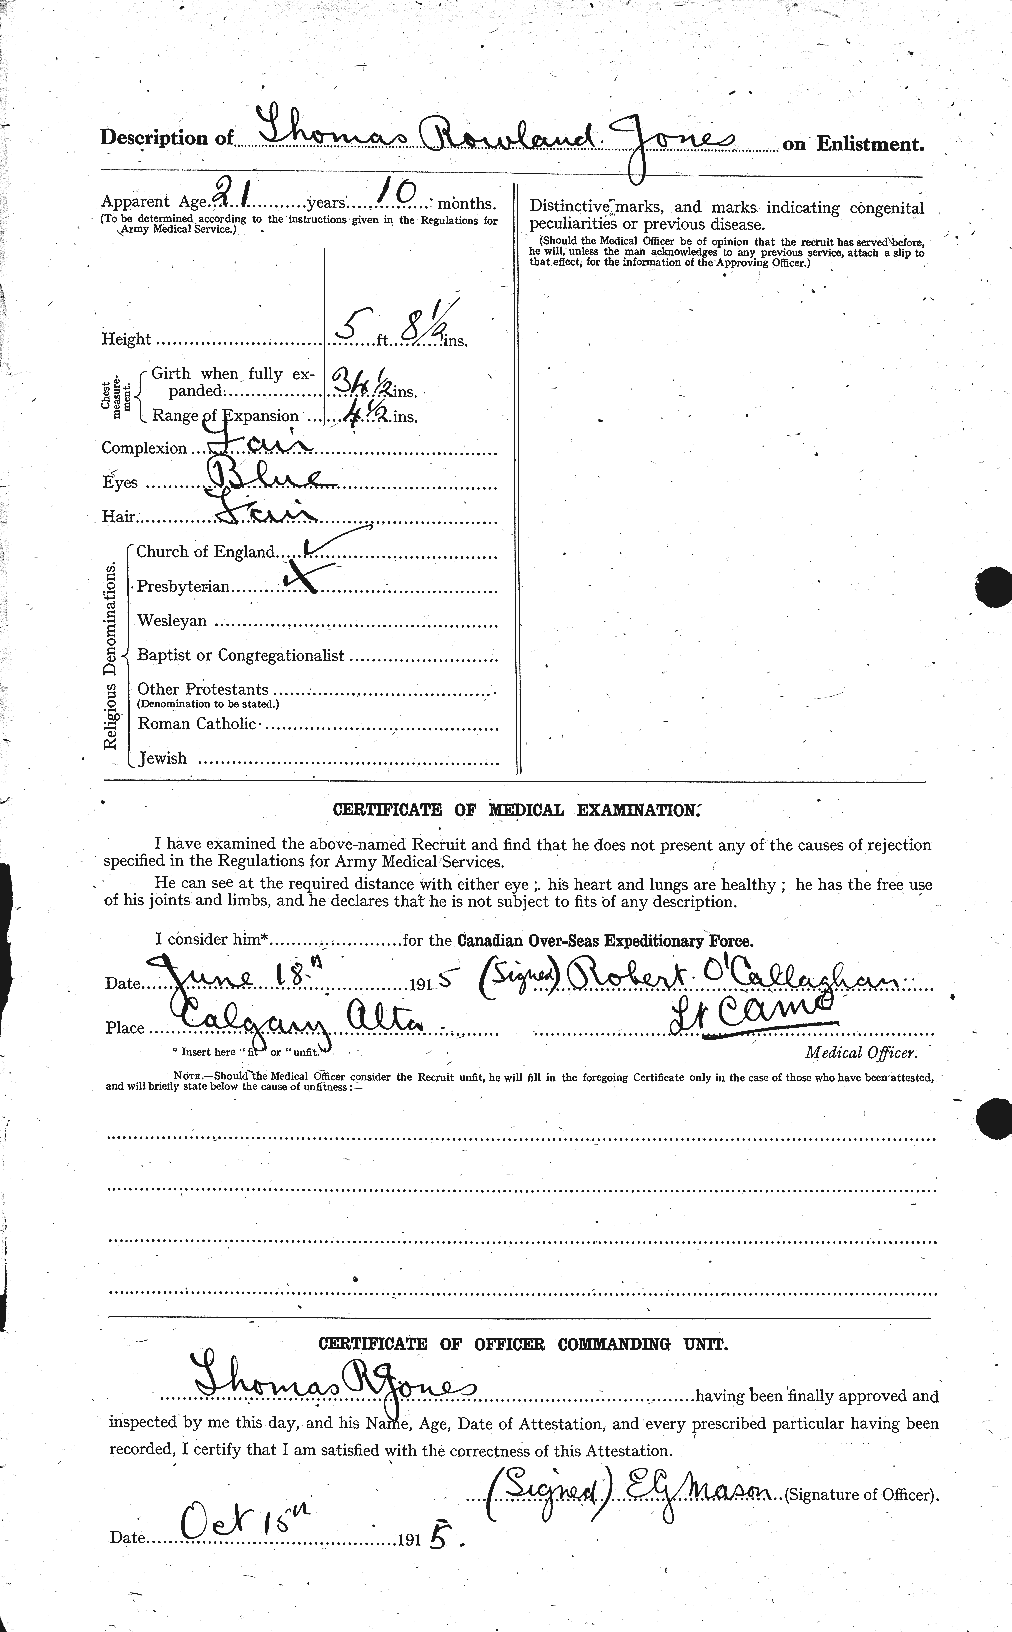 Personnel Records of the First World War - CEF 426682b